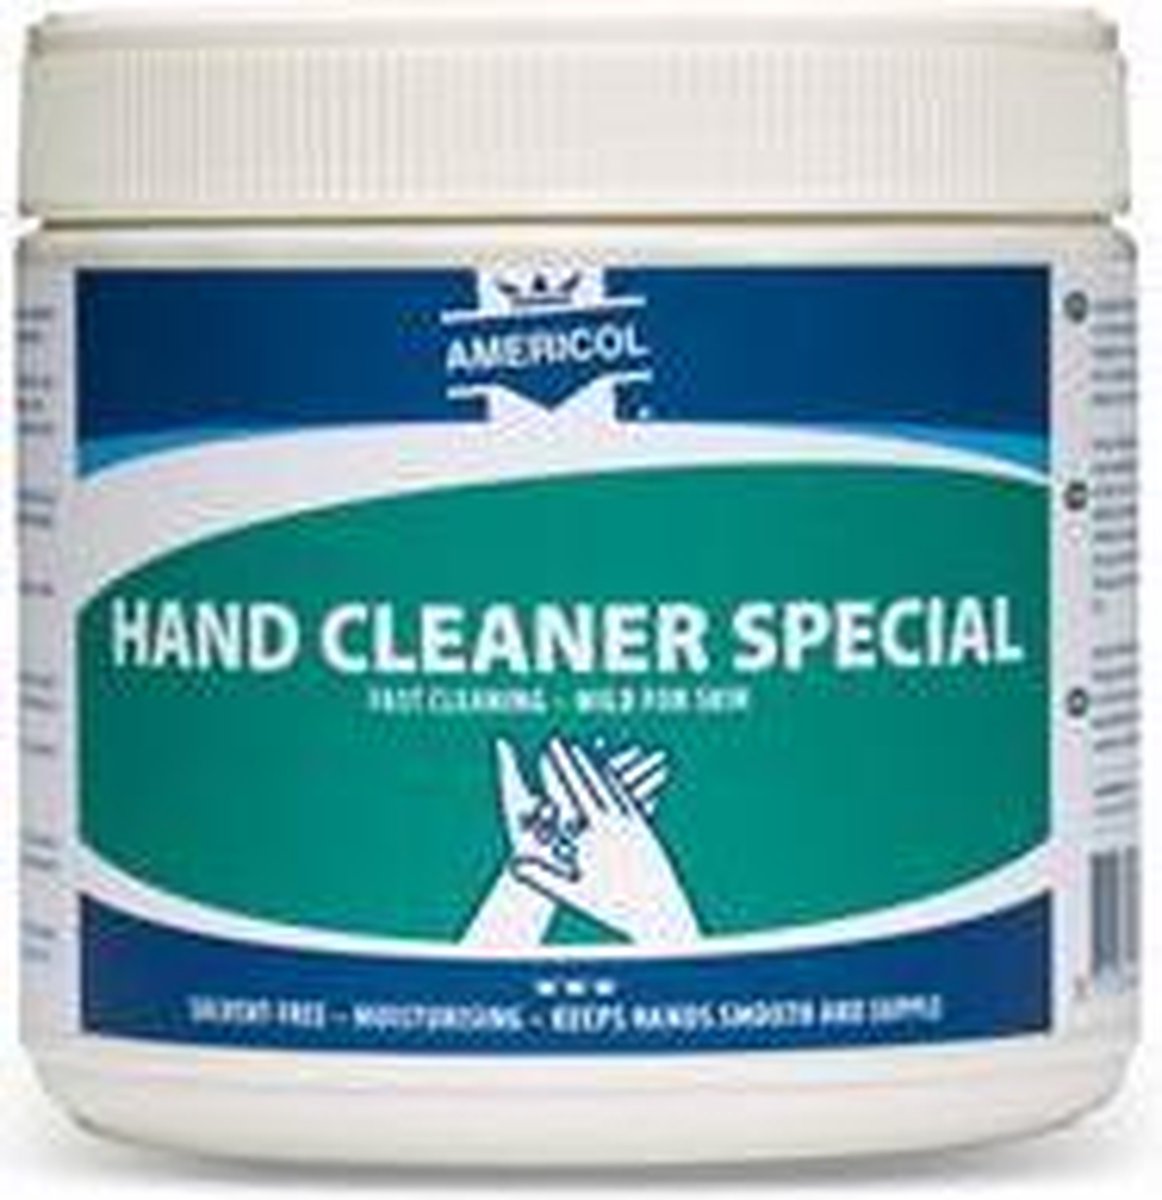 Handcleaner Special 600ml